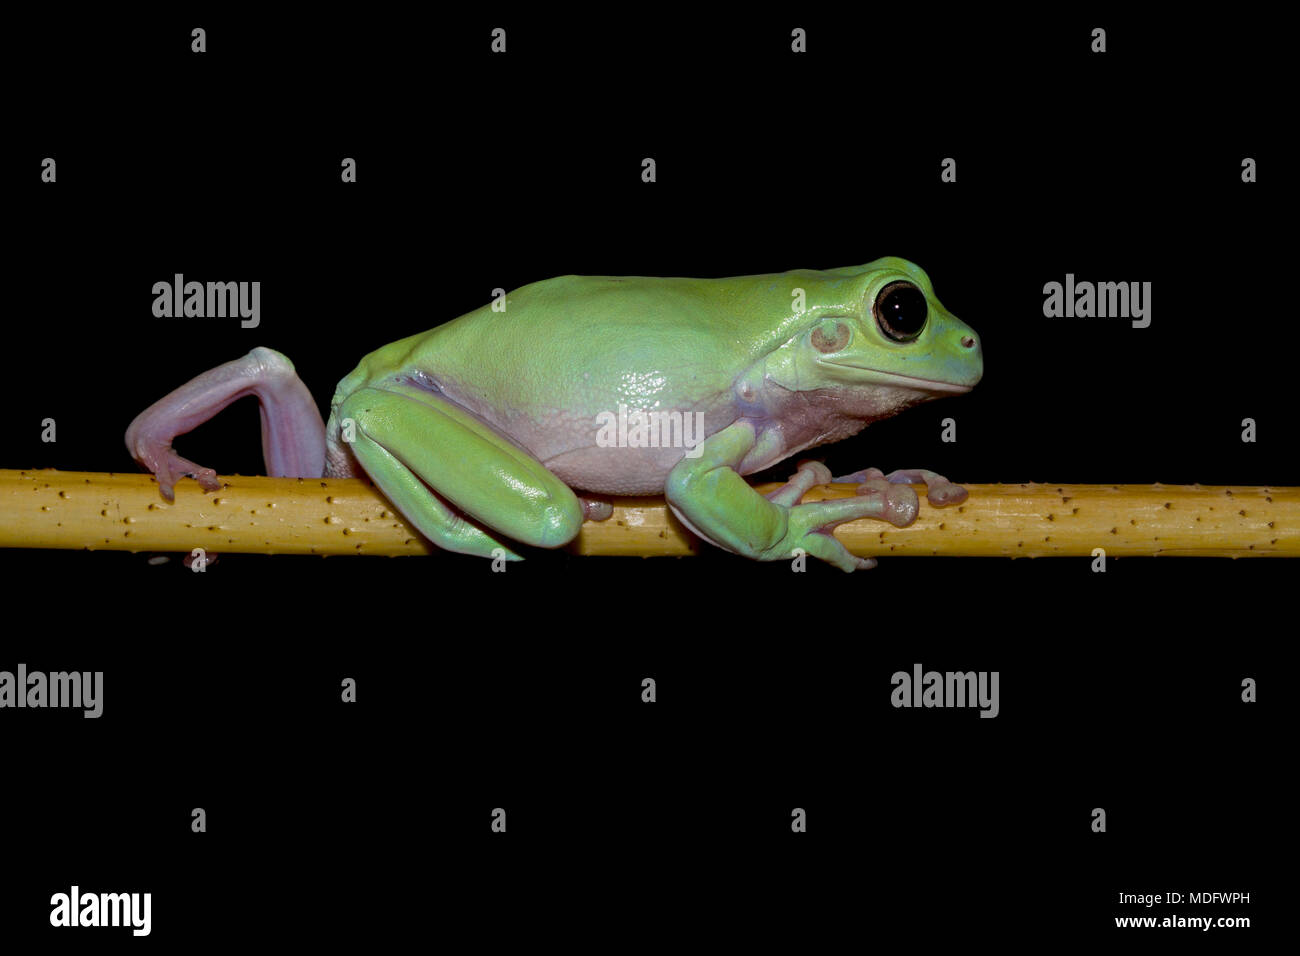 Dumpy frog on a branch Stock Photo